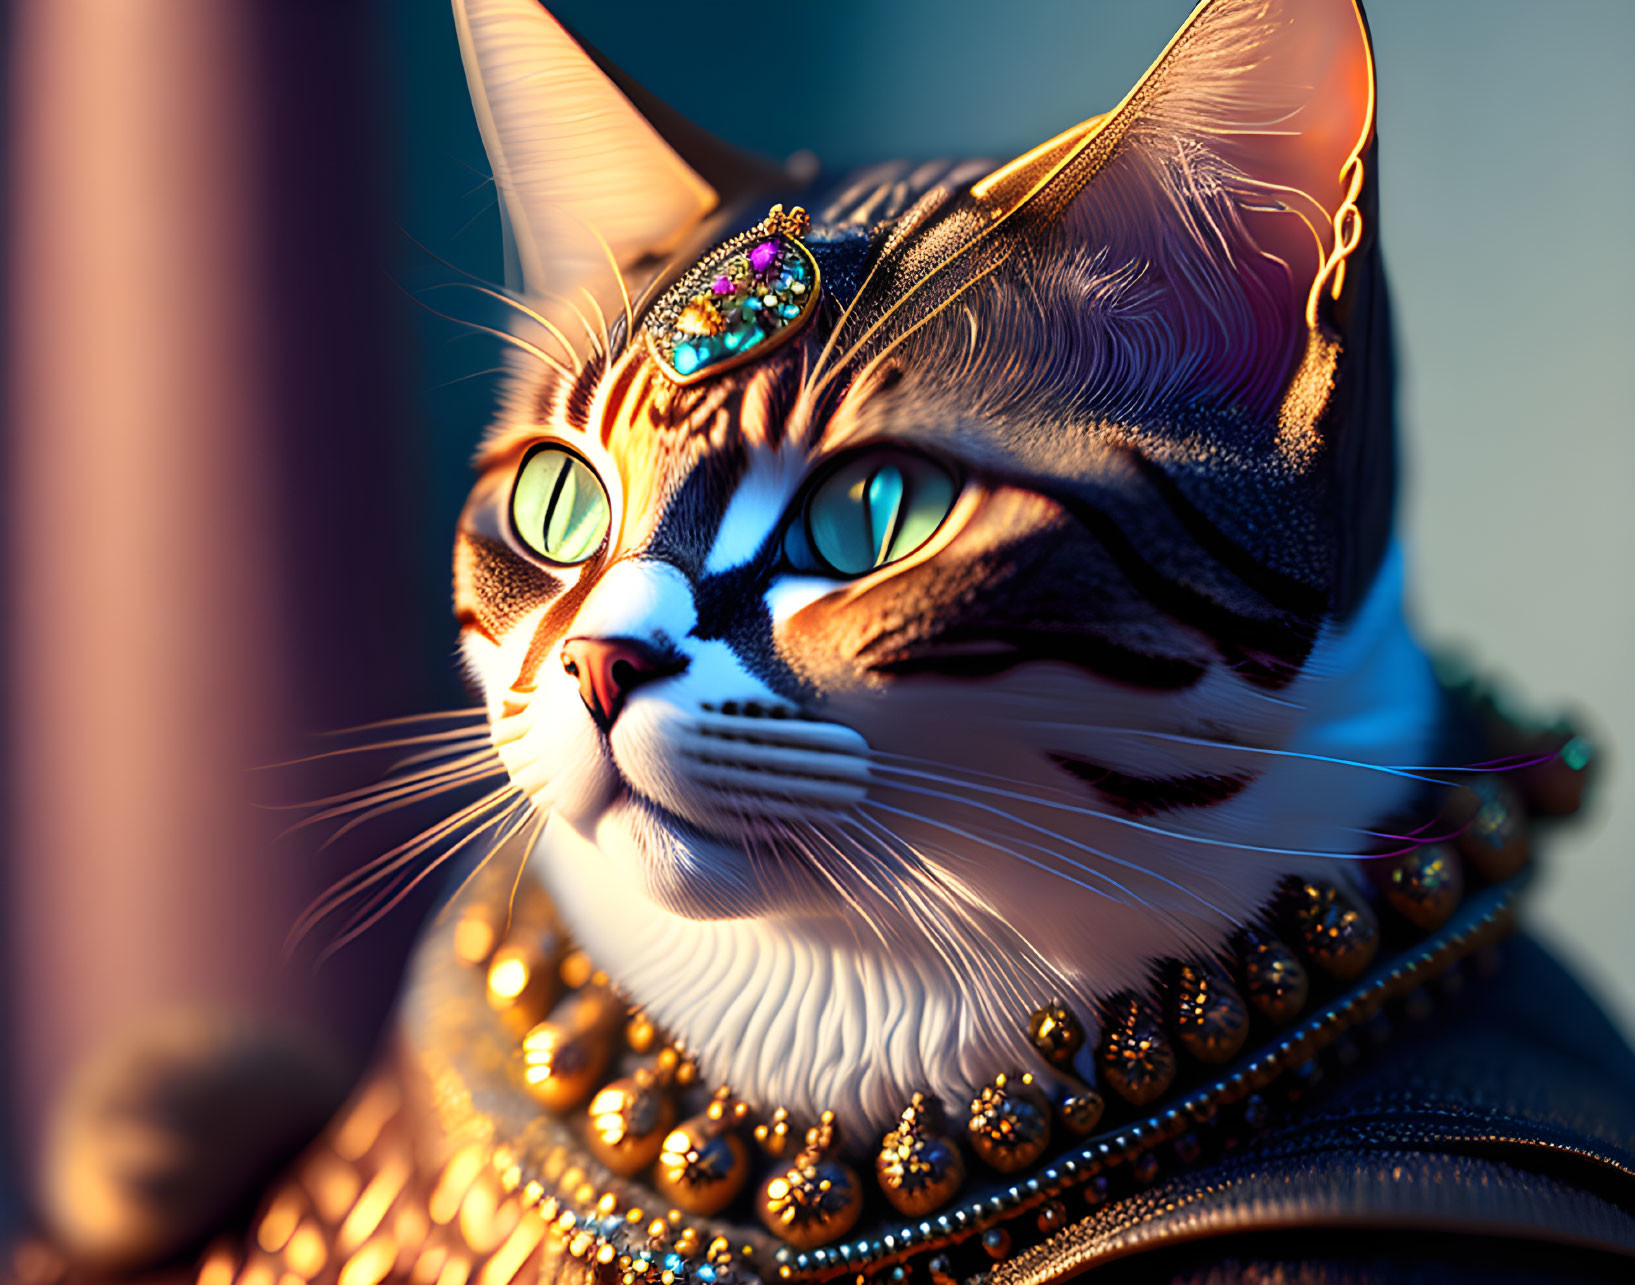 Regal cat digital artwork with green eyes and jeweled crown